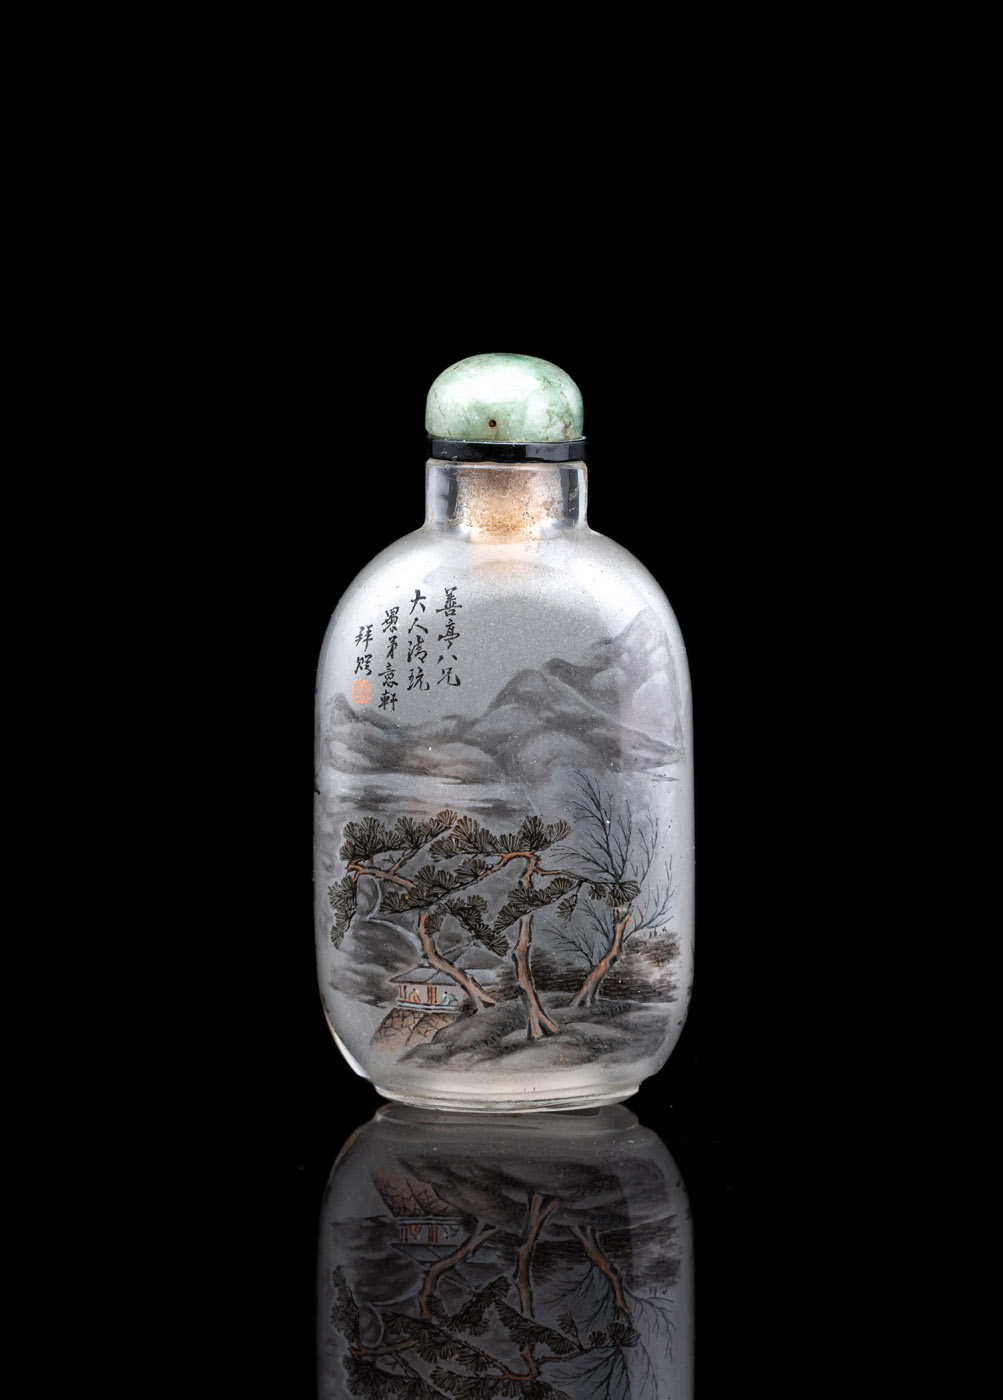 <b>A GLASS SNUFFBOTTLE WITH INSIDE PAINTING DEPICTING A ROOSTER AND PEONIES ('RANK AND WEALTH') AND A LANDSCAPE WITH A SCHOLAR'S STUDIO</b>